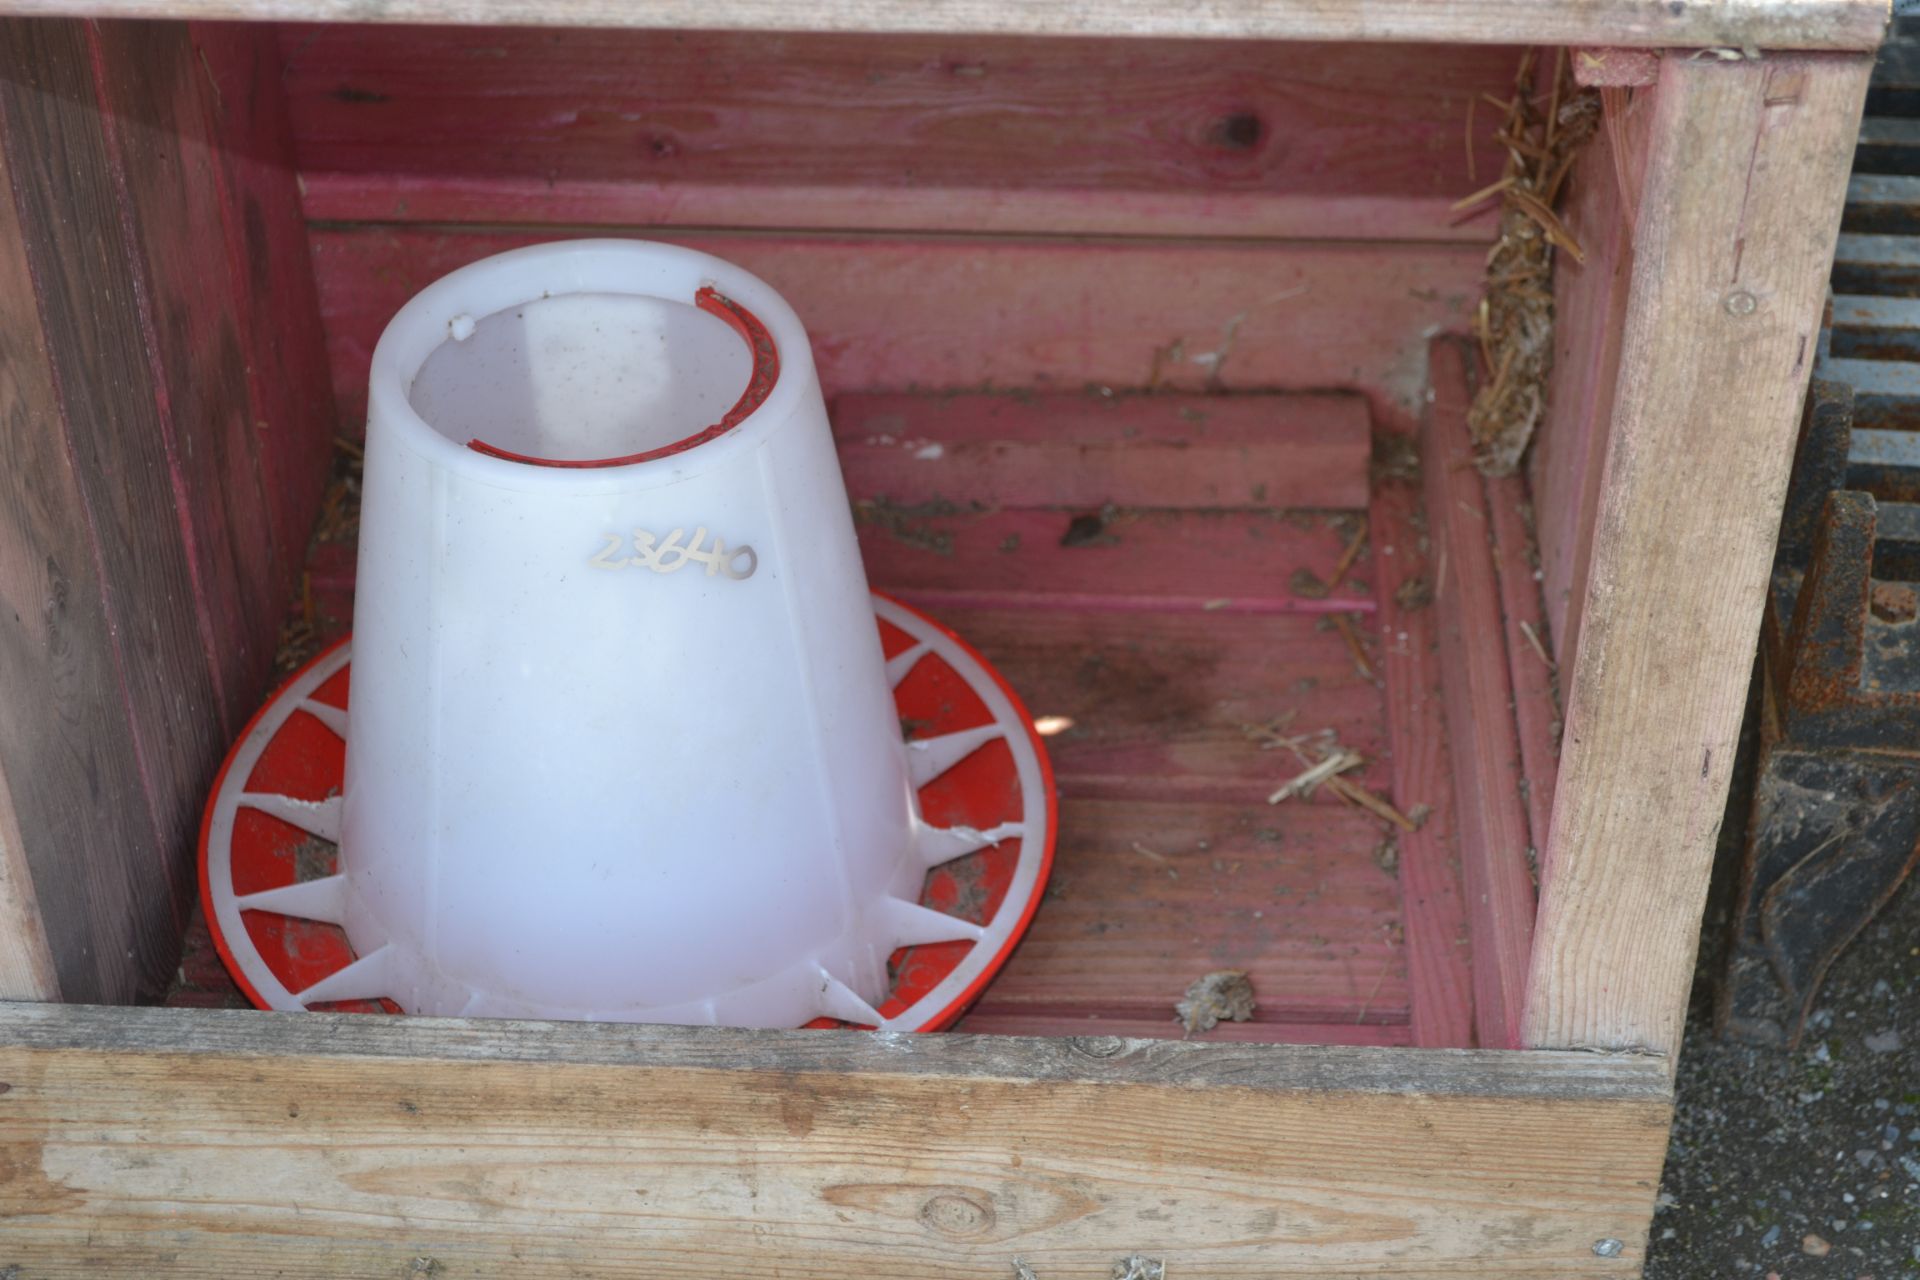 Various chicken nest boxes and chicken drinkers and feeders. - Image 3 of 3